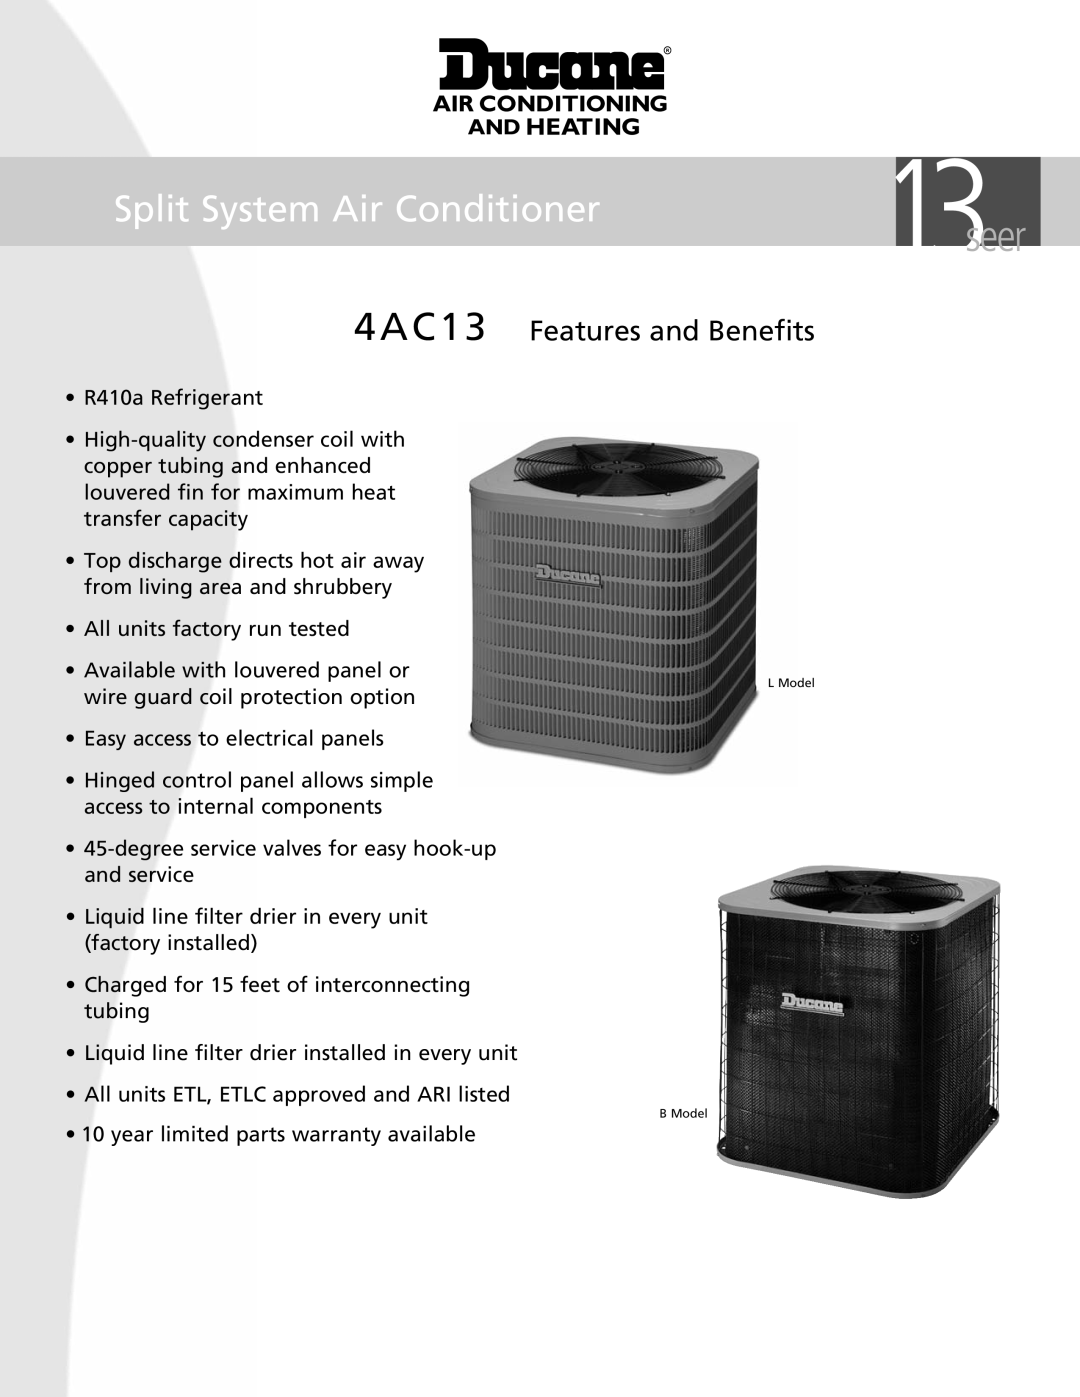 Ducane (HVAC) warranty seer, Split System Air Conditioner, 4AC13 Features and Benefits 